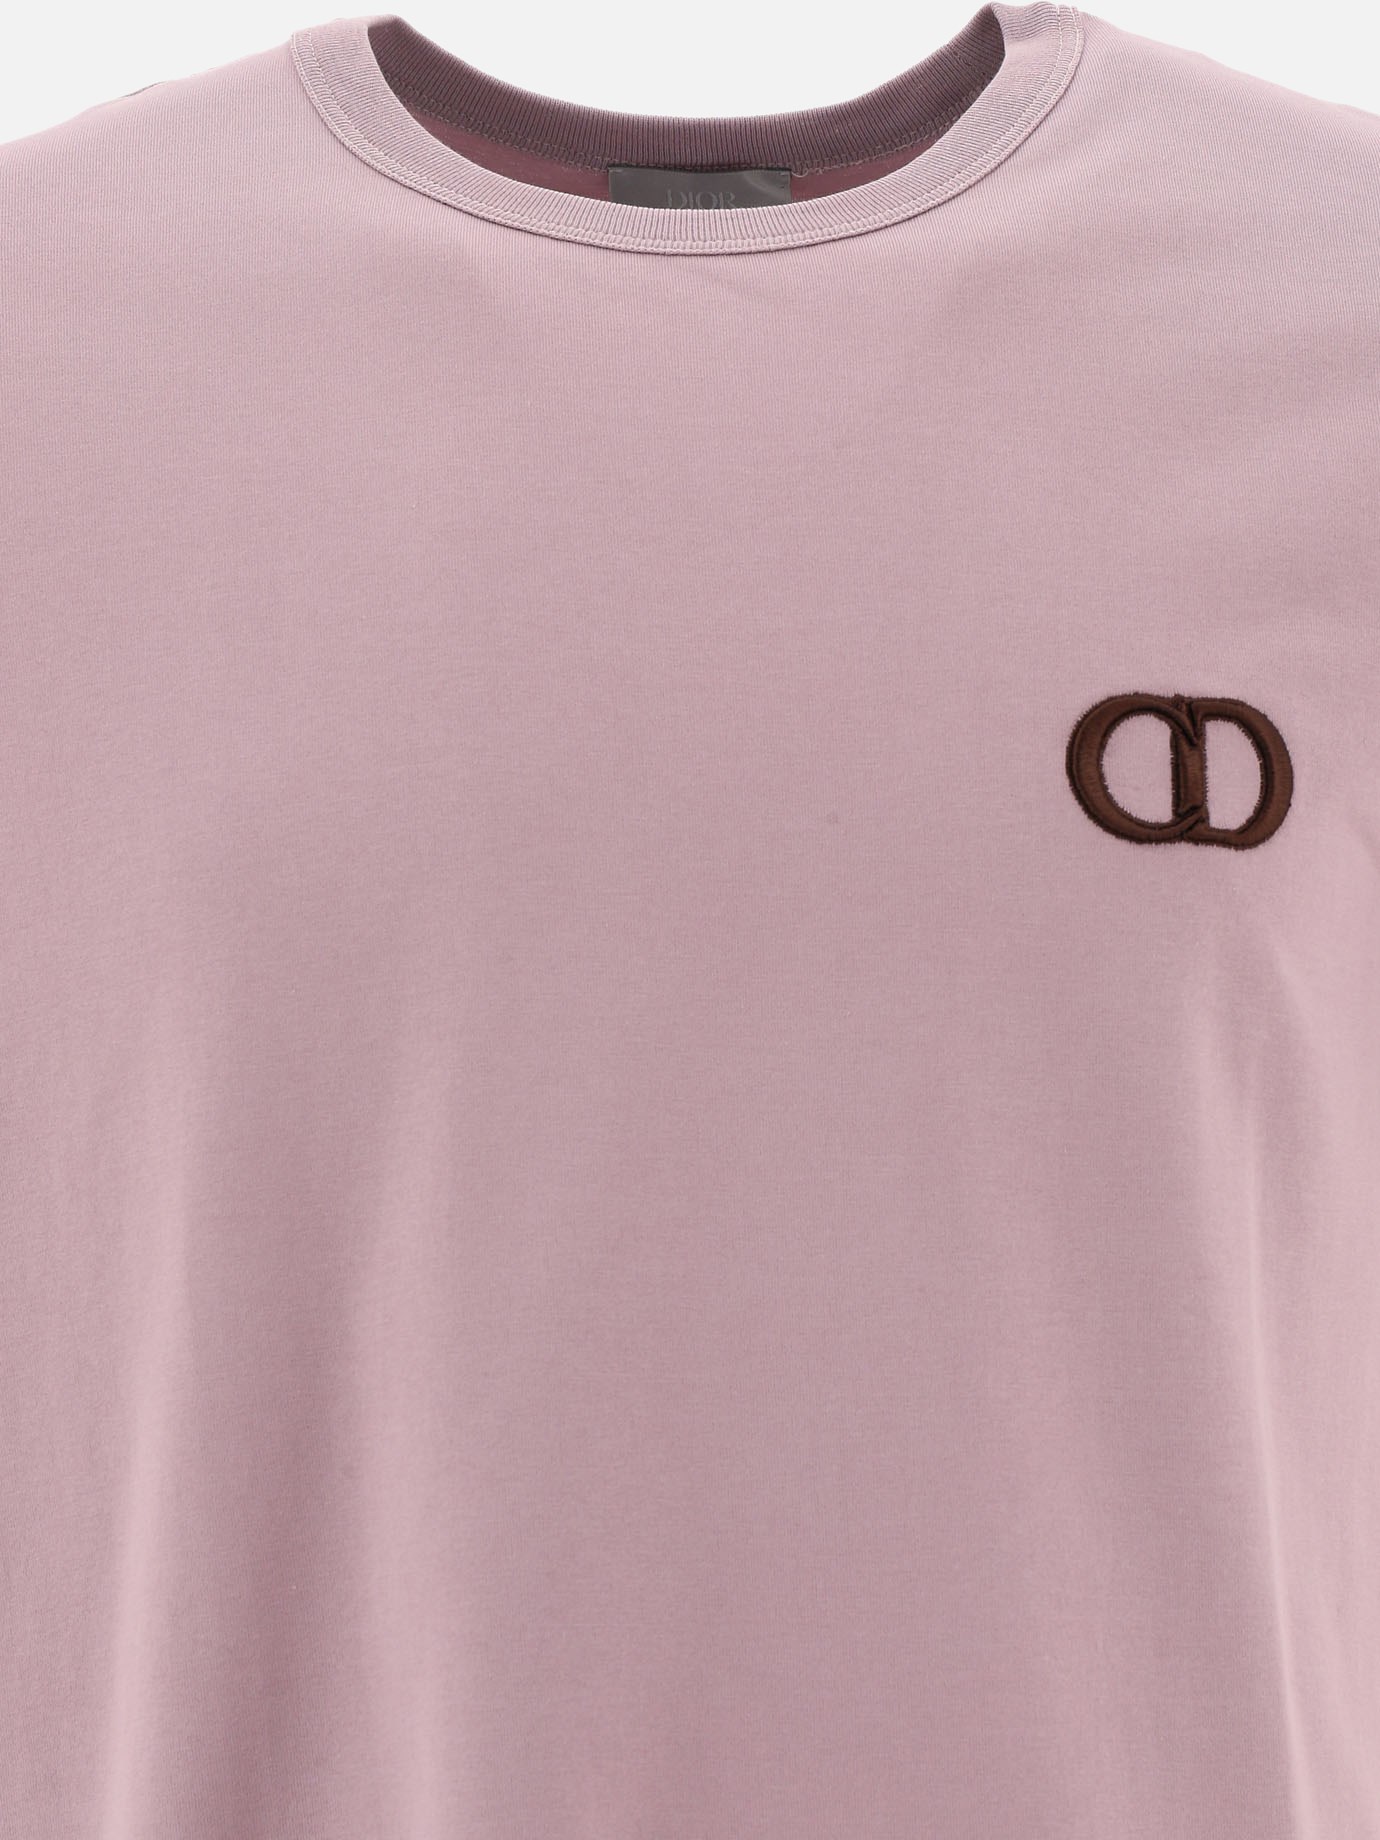  CD Icon  t-shirt by Dior